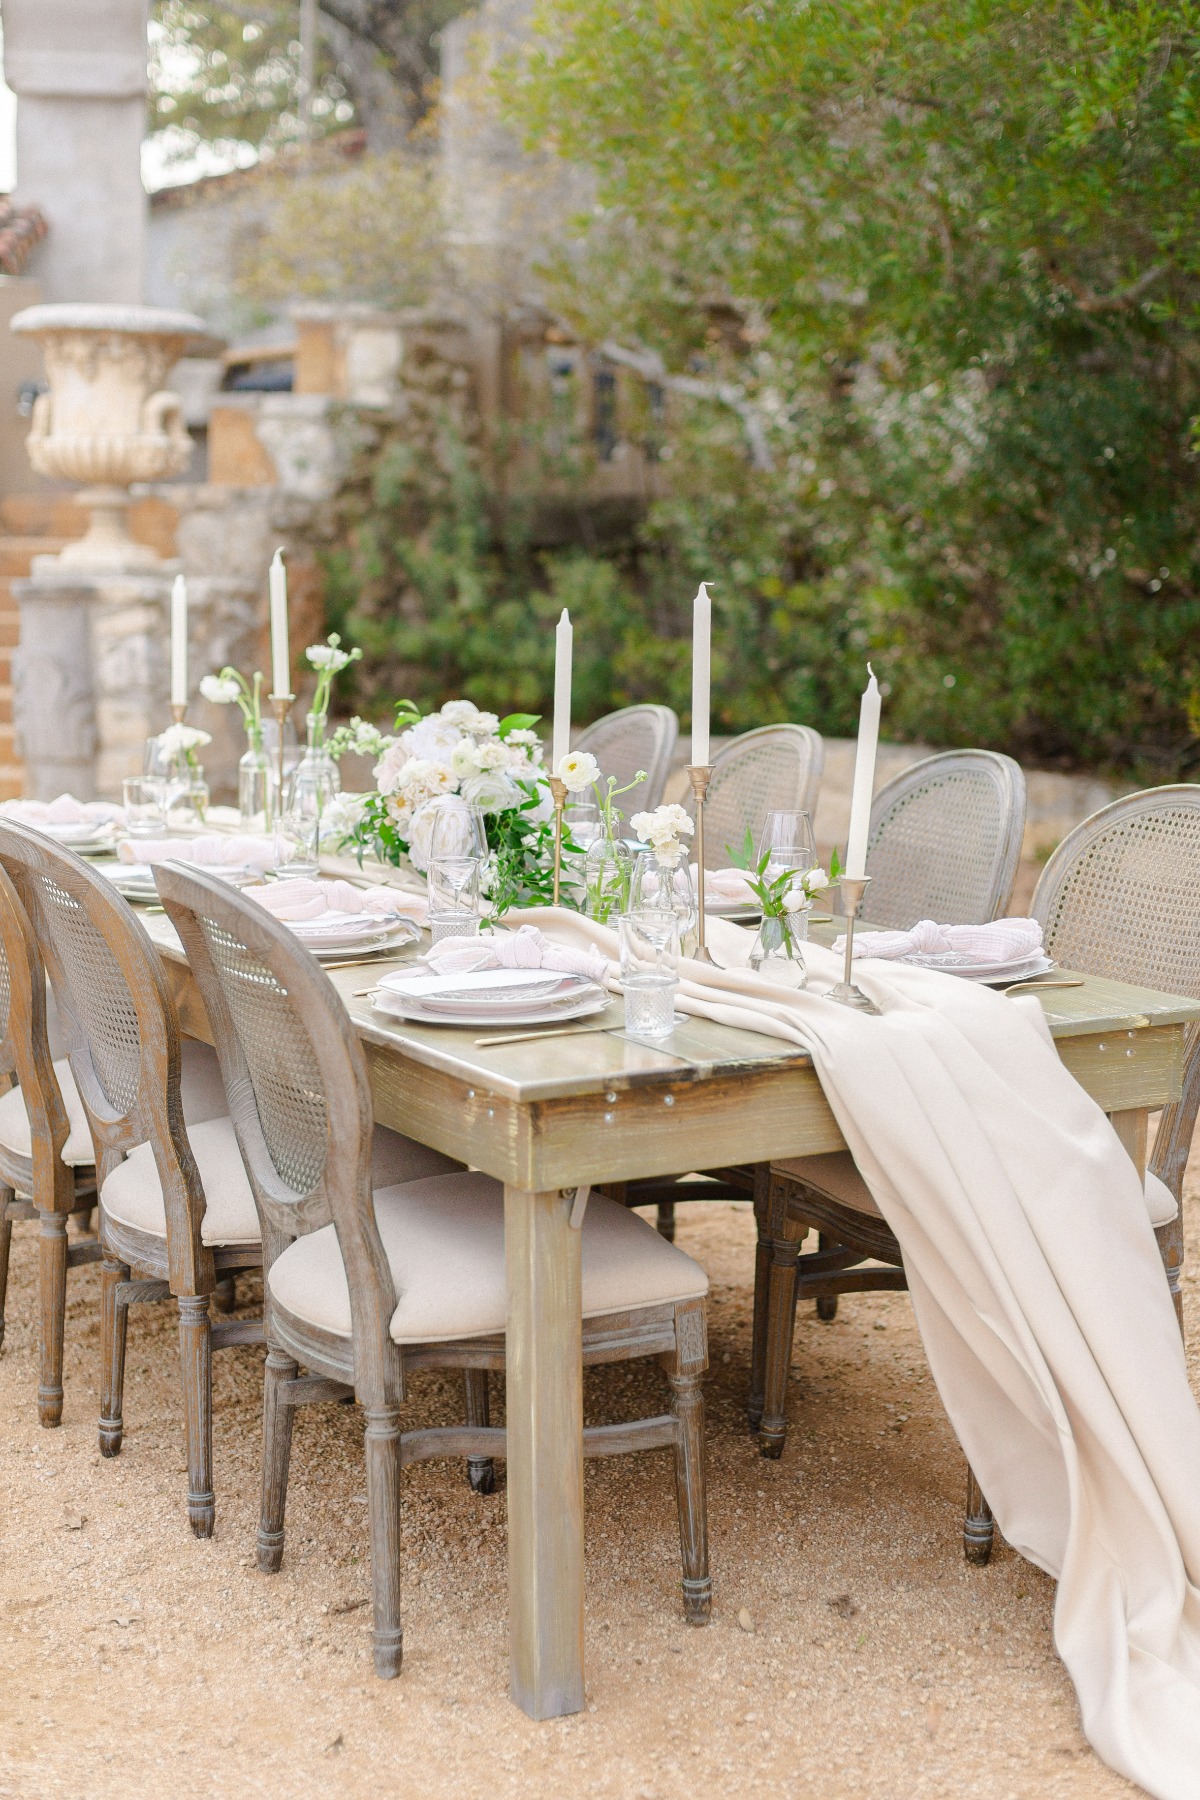 How To Create The Wedding You Want...Wherever You Are